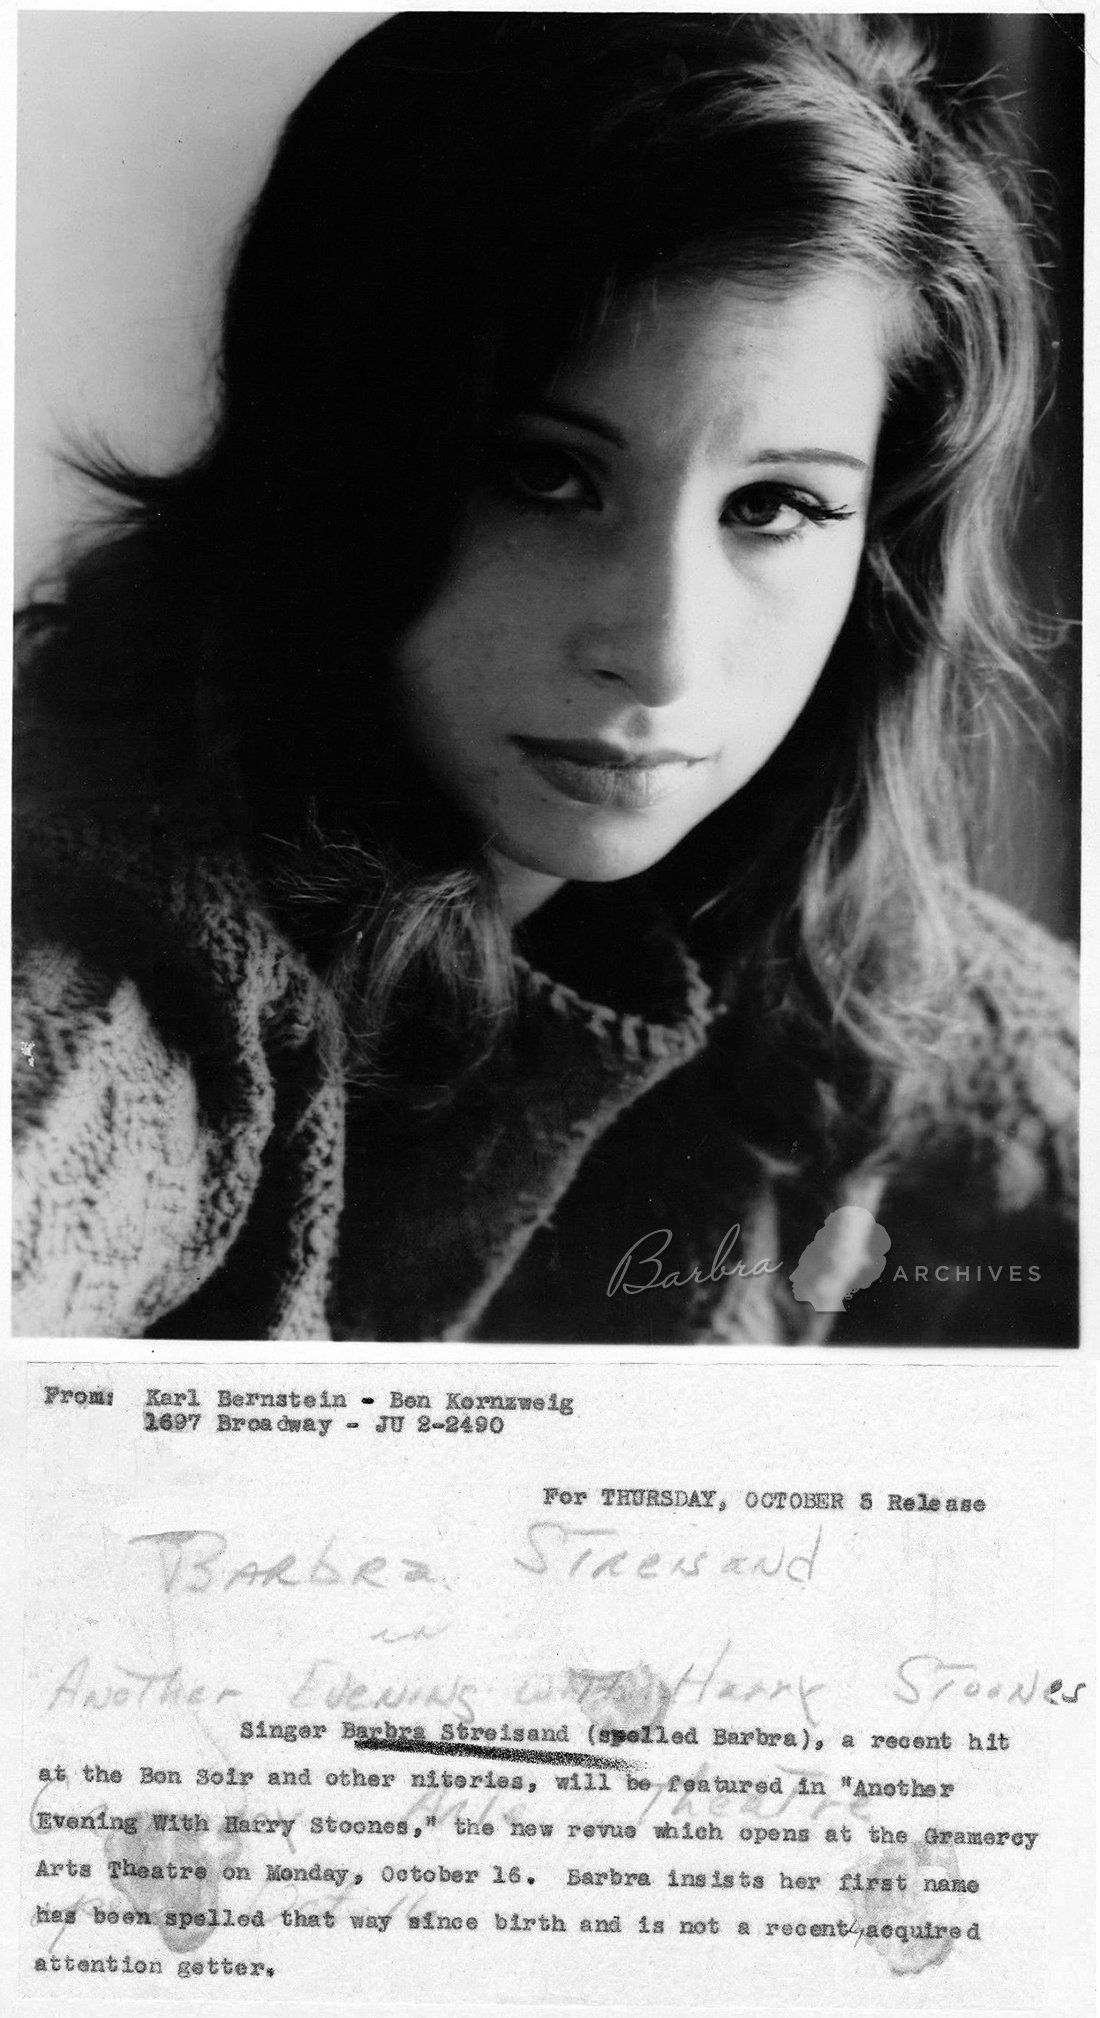 Barbra's publicity photo with text explaining how her name is spelled without an extra 'a'